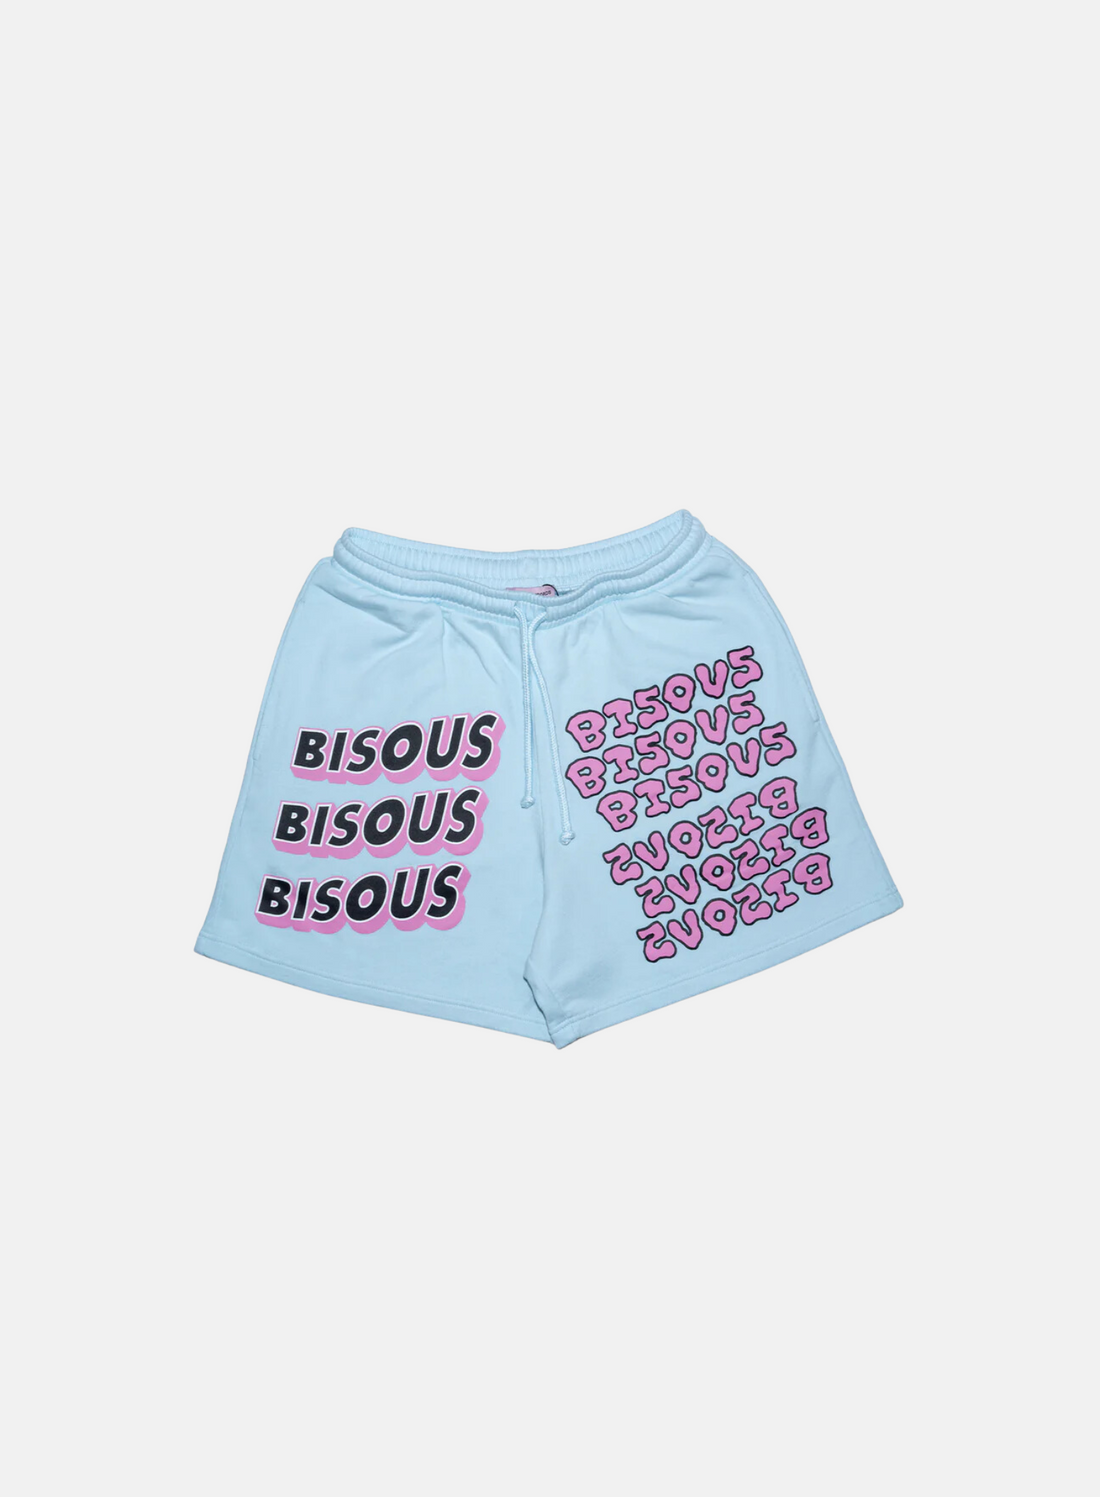 BISOUS SKATEBOARDS Sonic Slime Shorts Blue - Hympala Store 